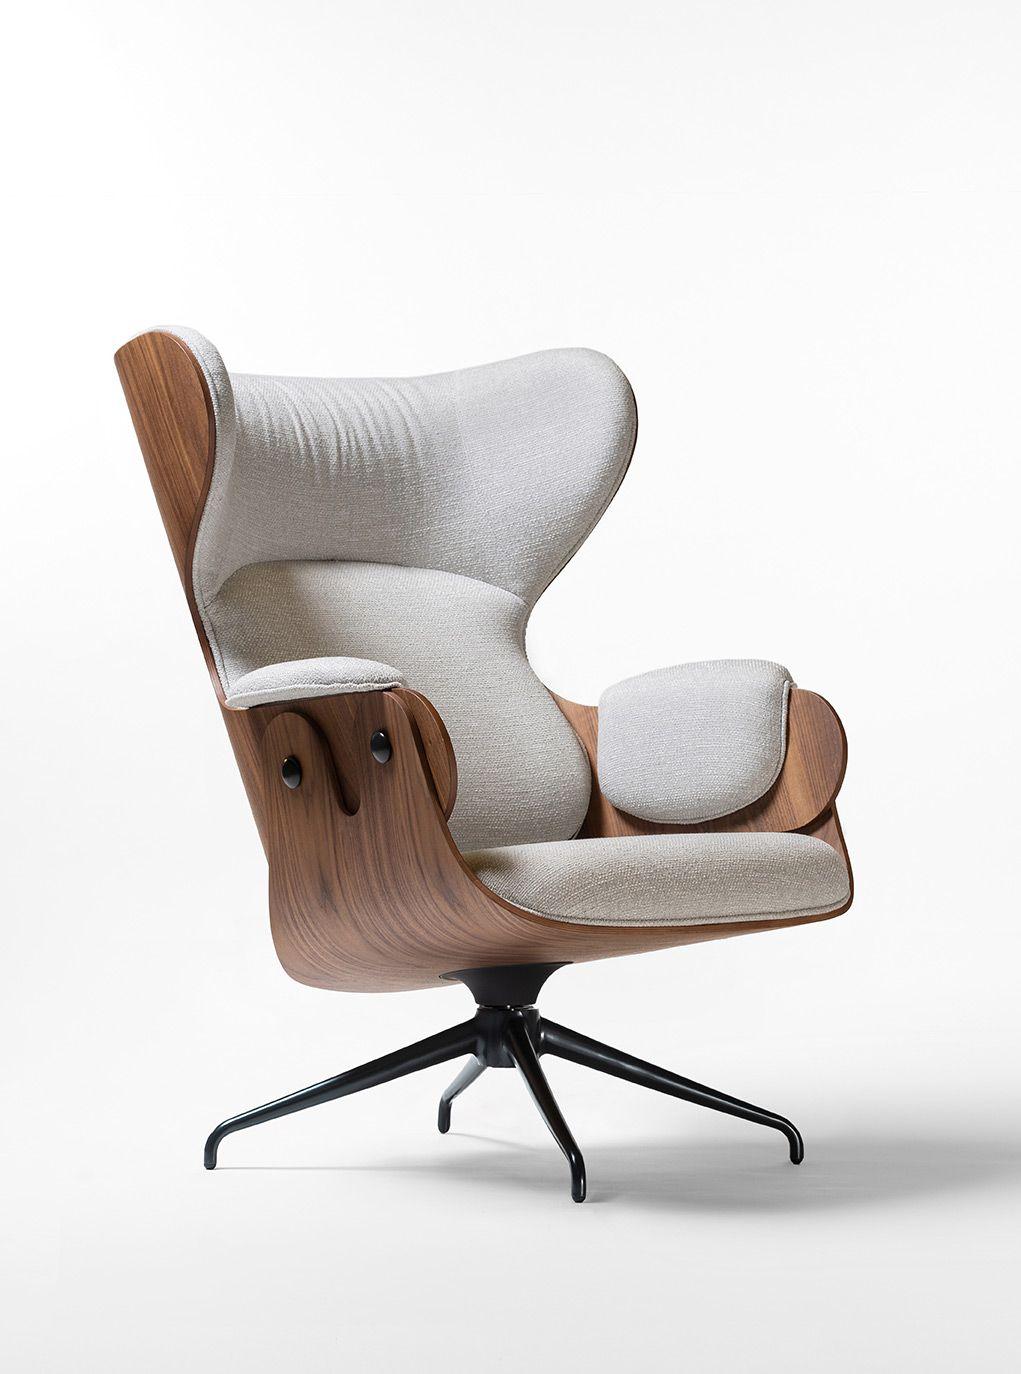 Spanish Lounger White Armchair by Jaime Hayon For Sale